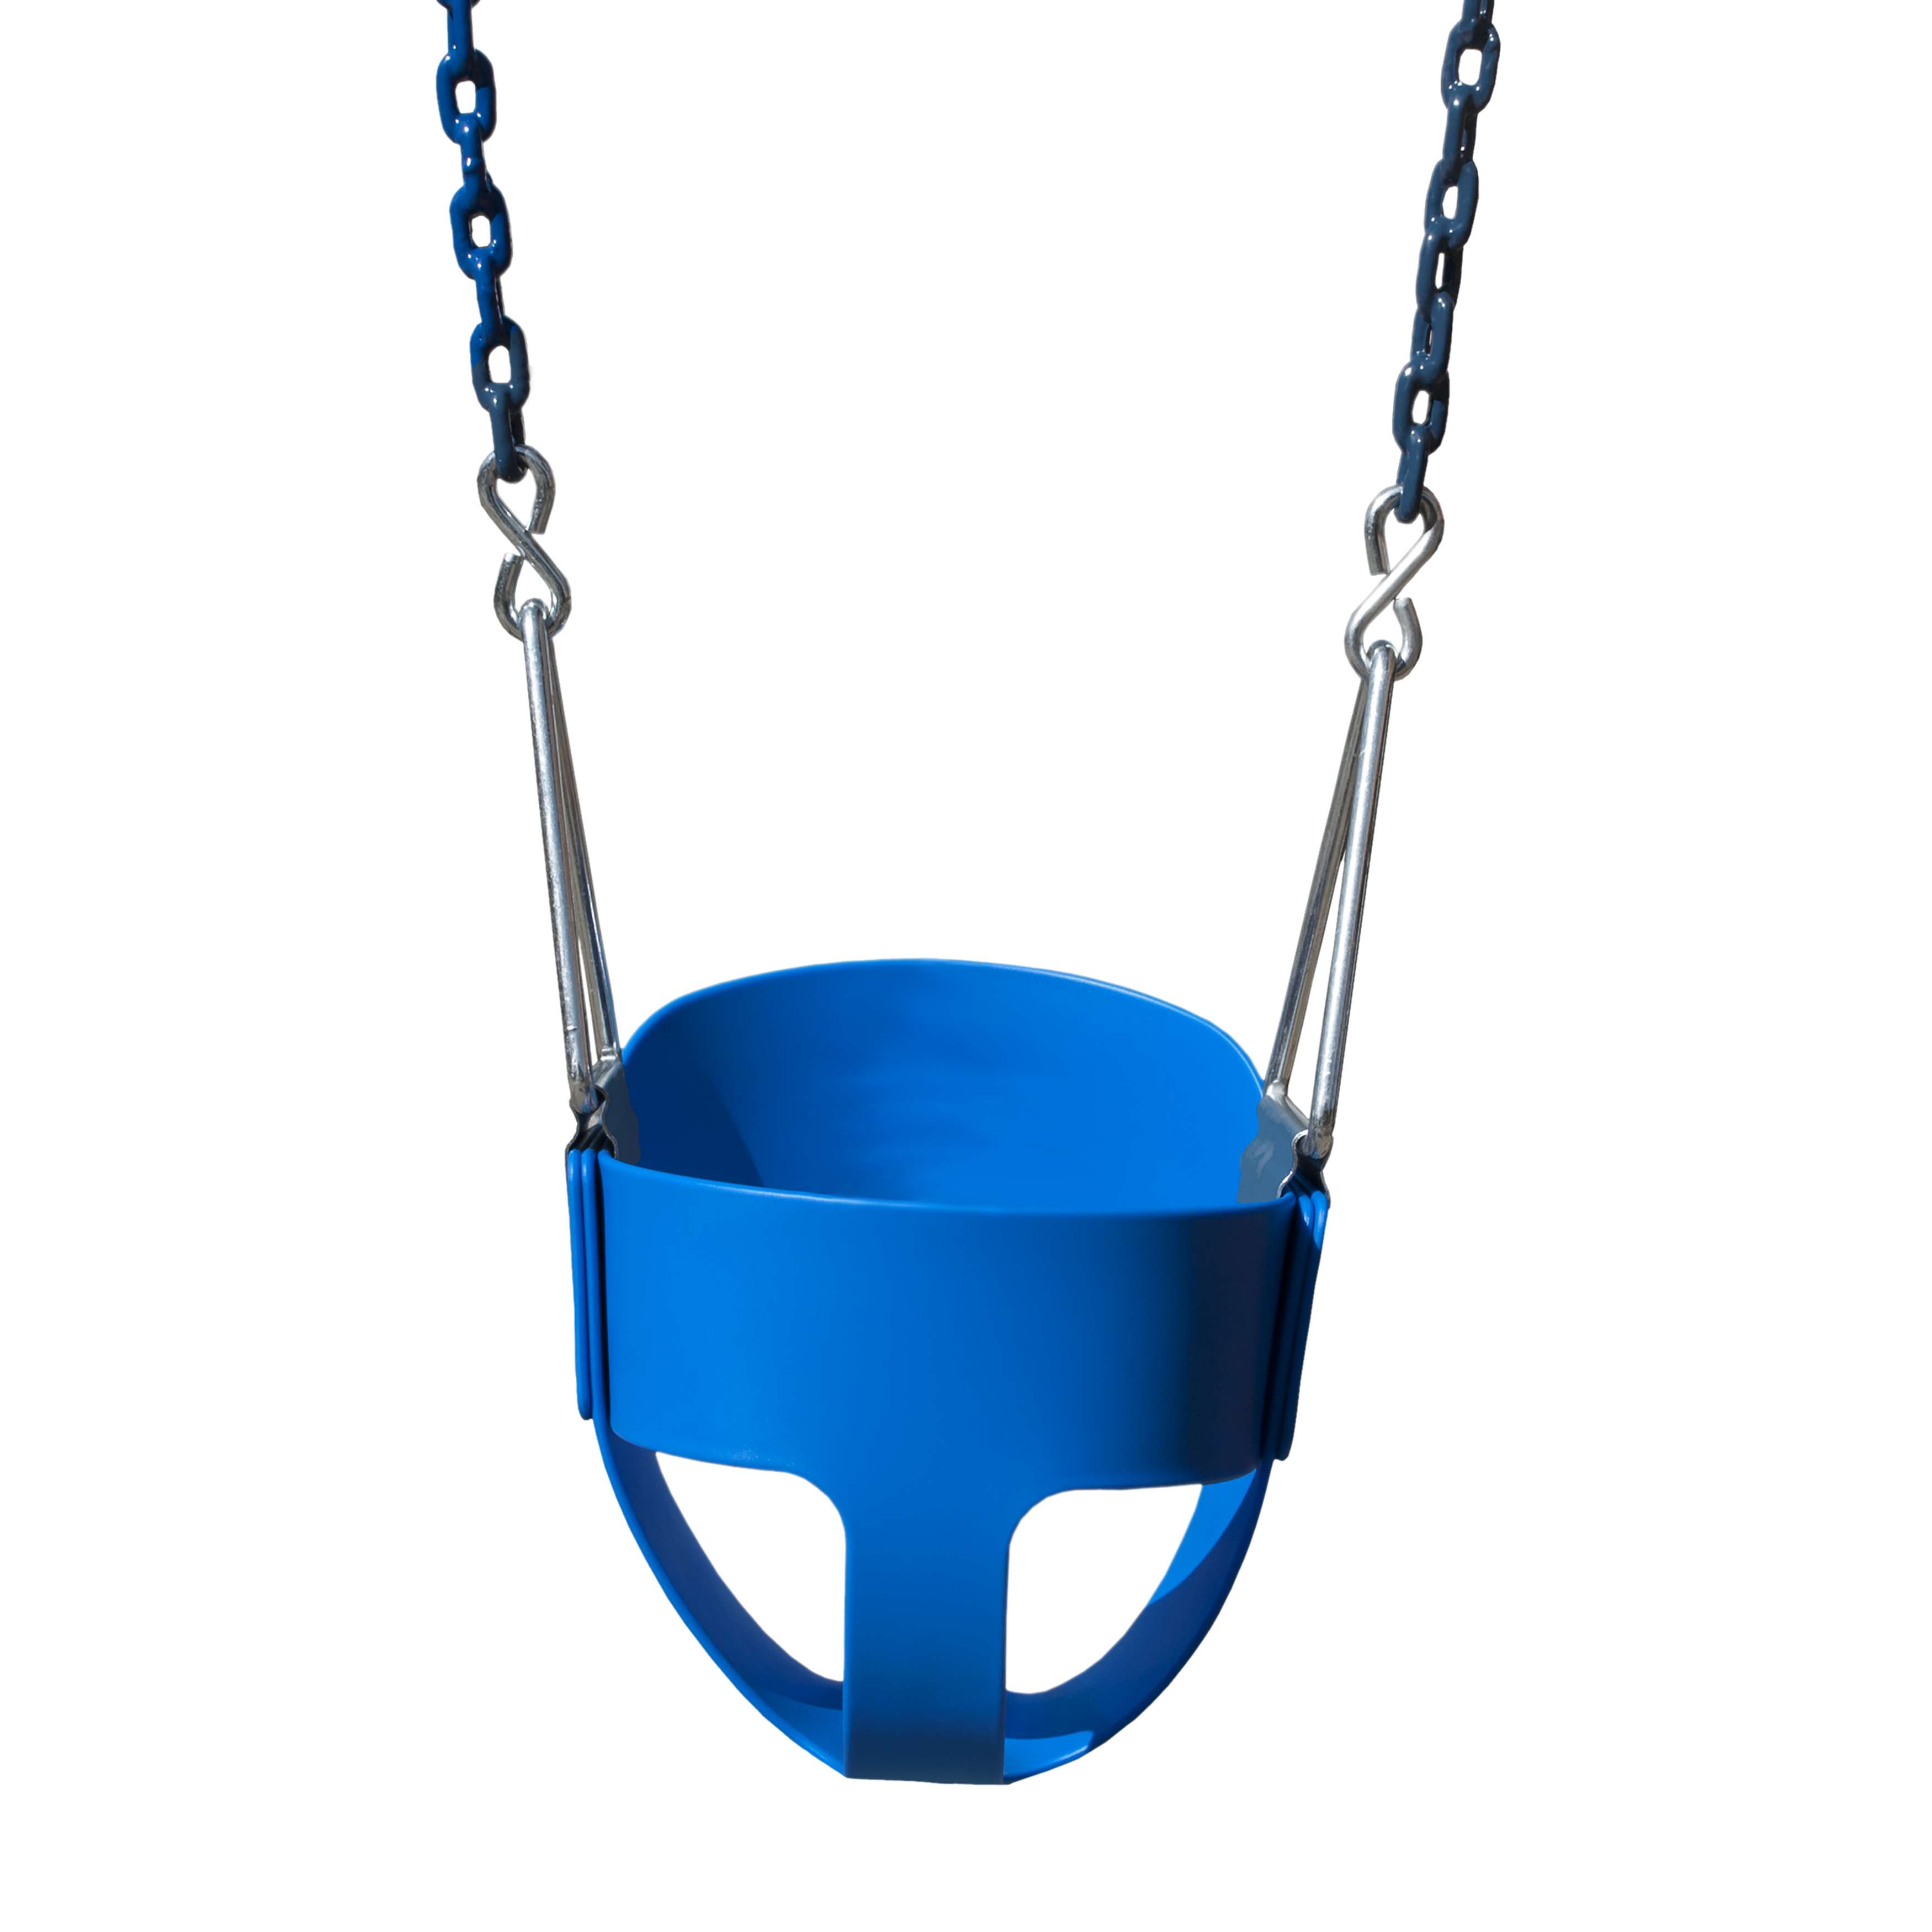 Gorilla Playsets Full Bucket Toddler Swing with Coated Chains - image 1 of 4